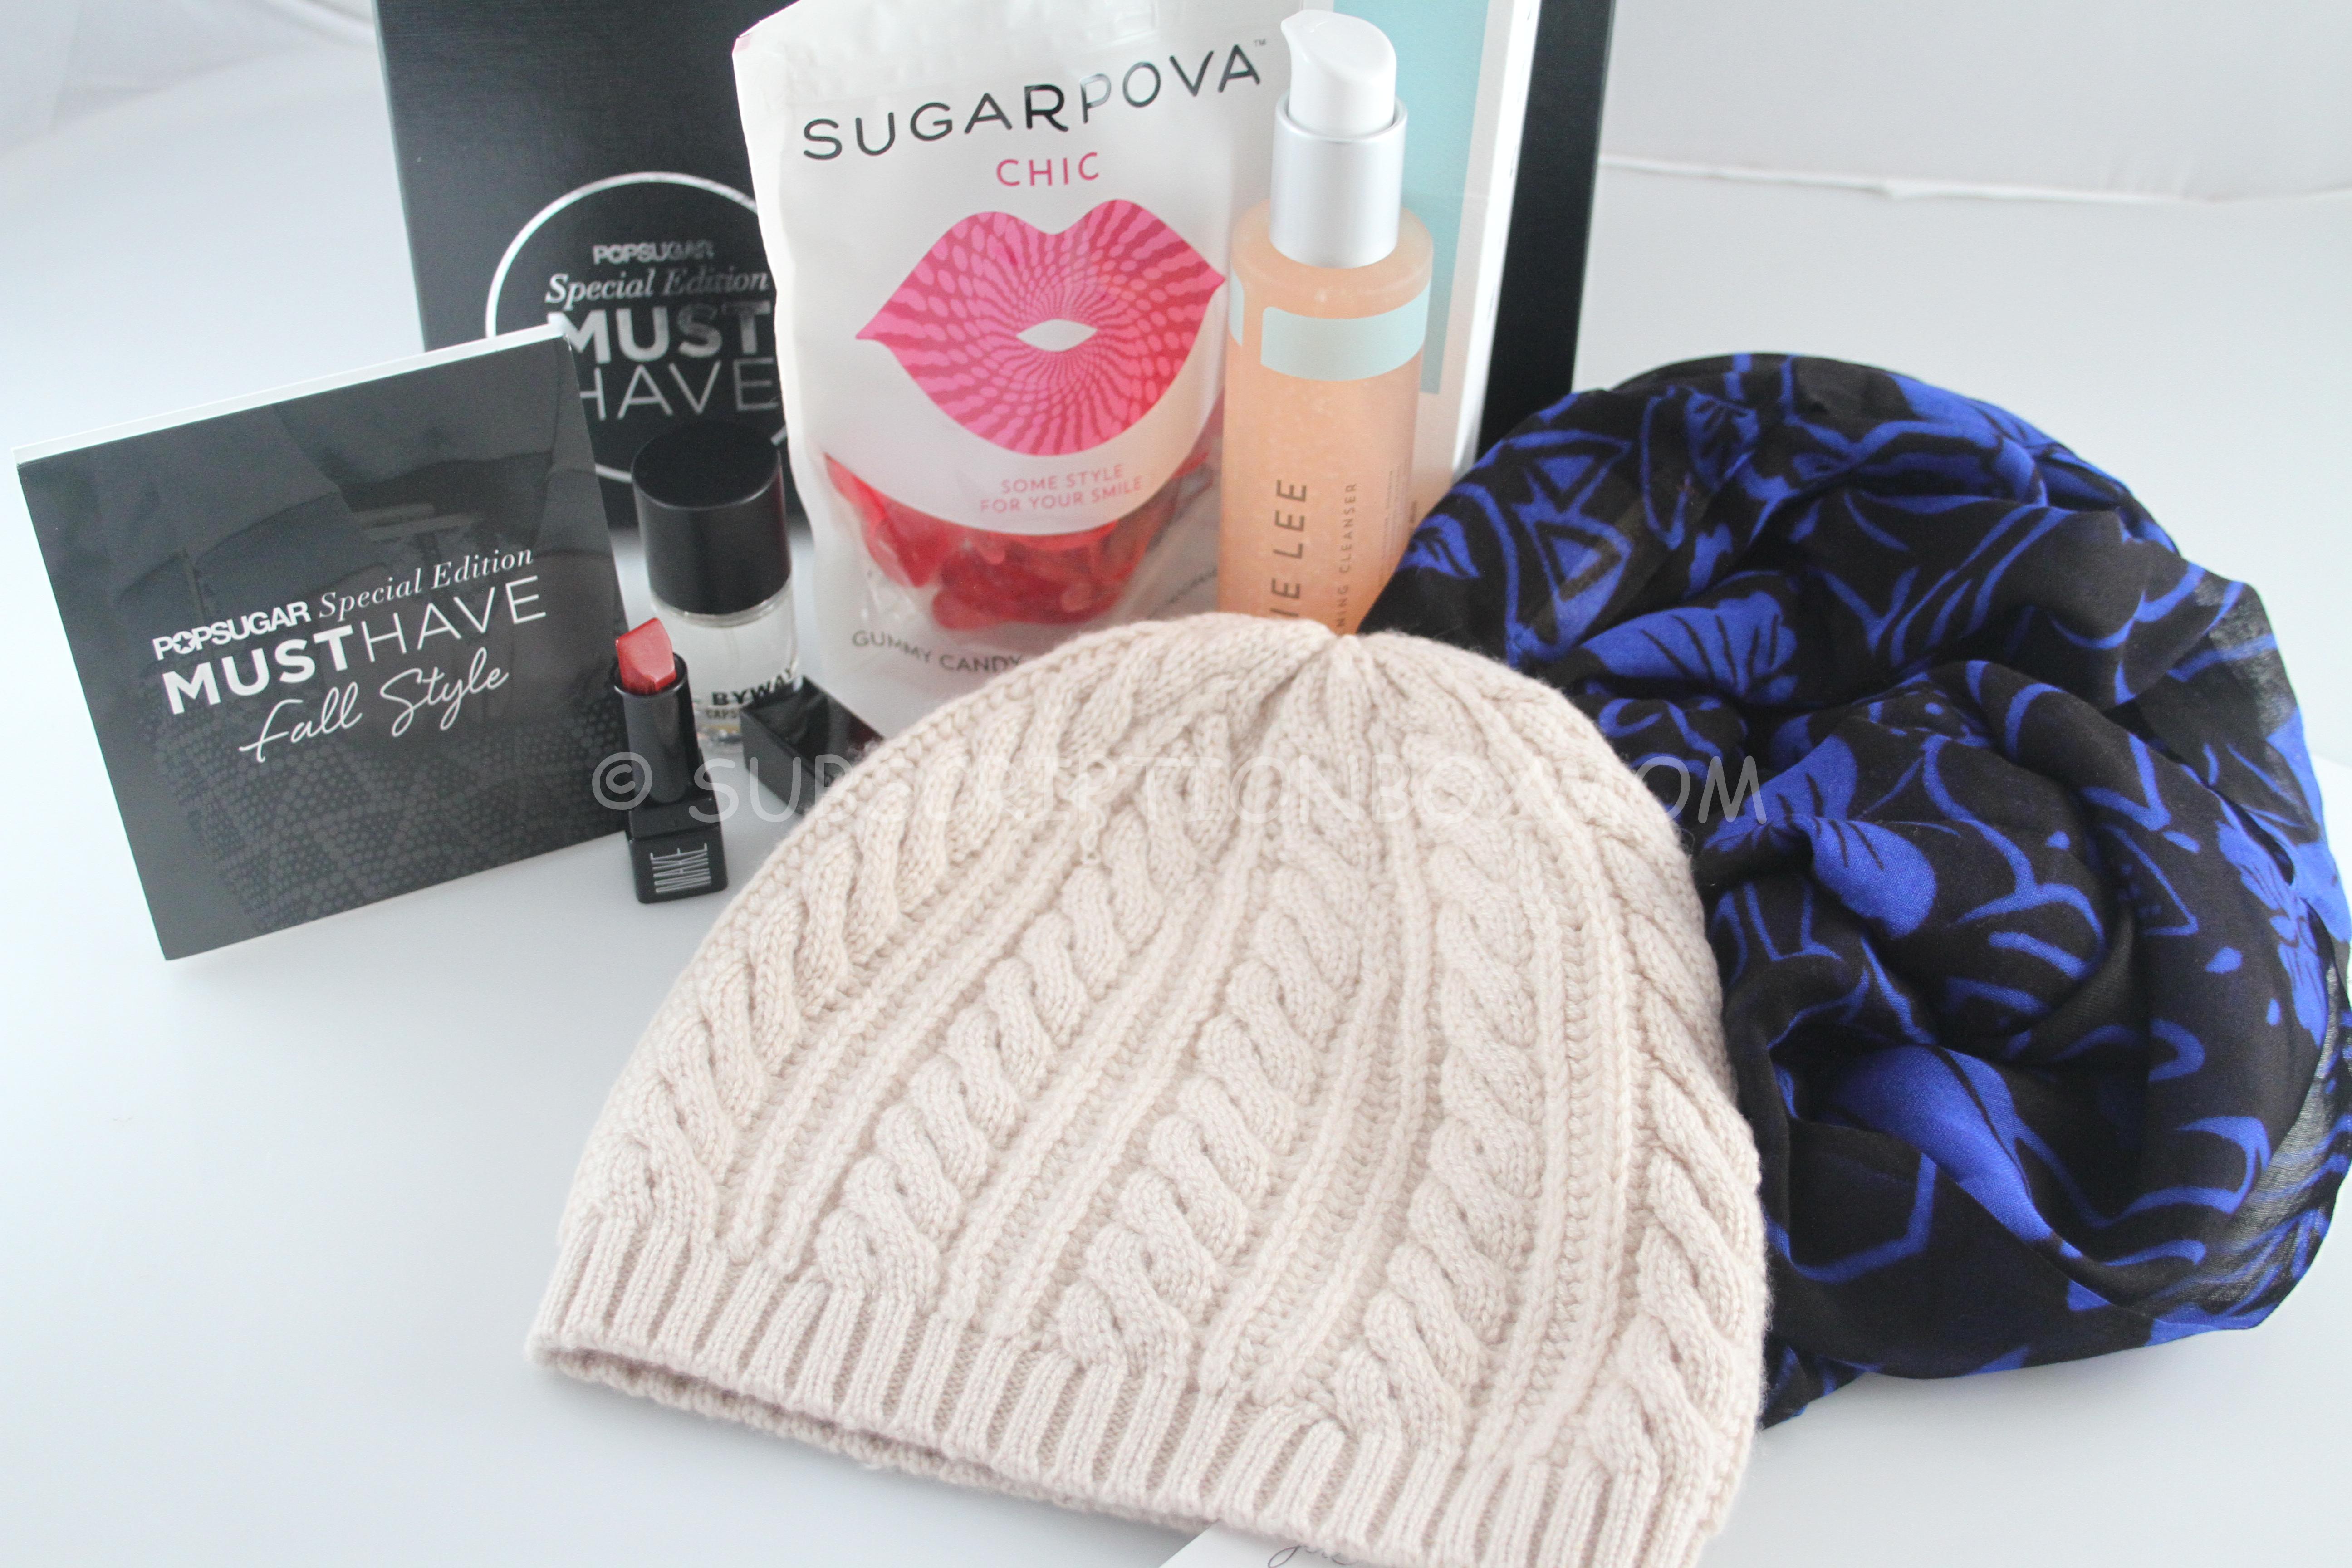 Popsugar Must Have Fall Style Special Edition Box Review + Coupon